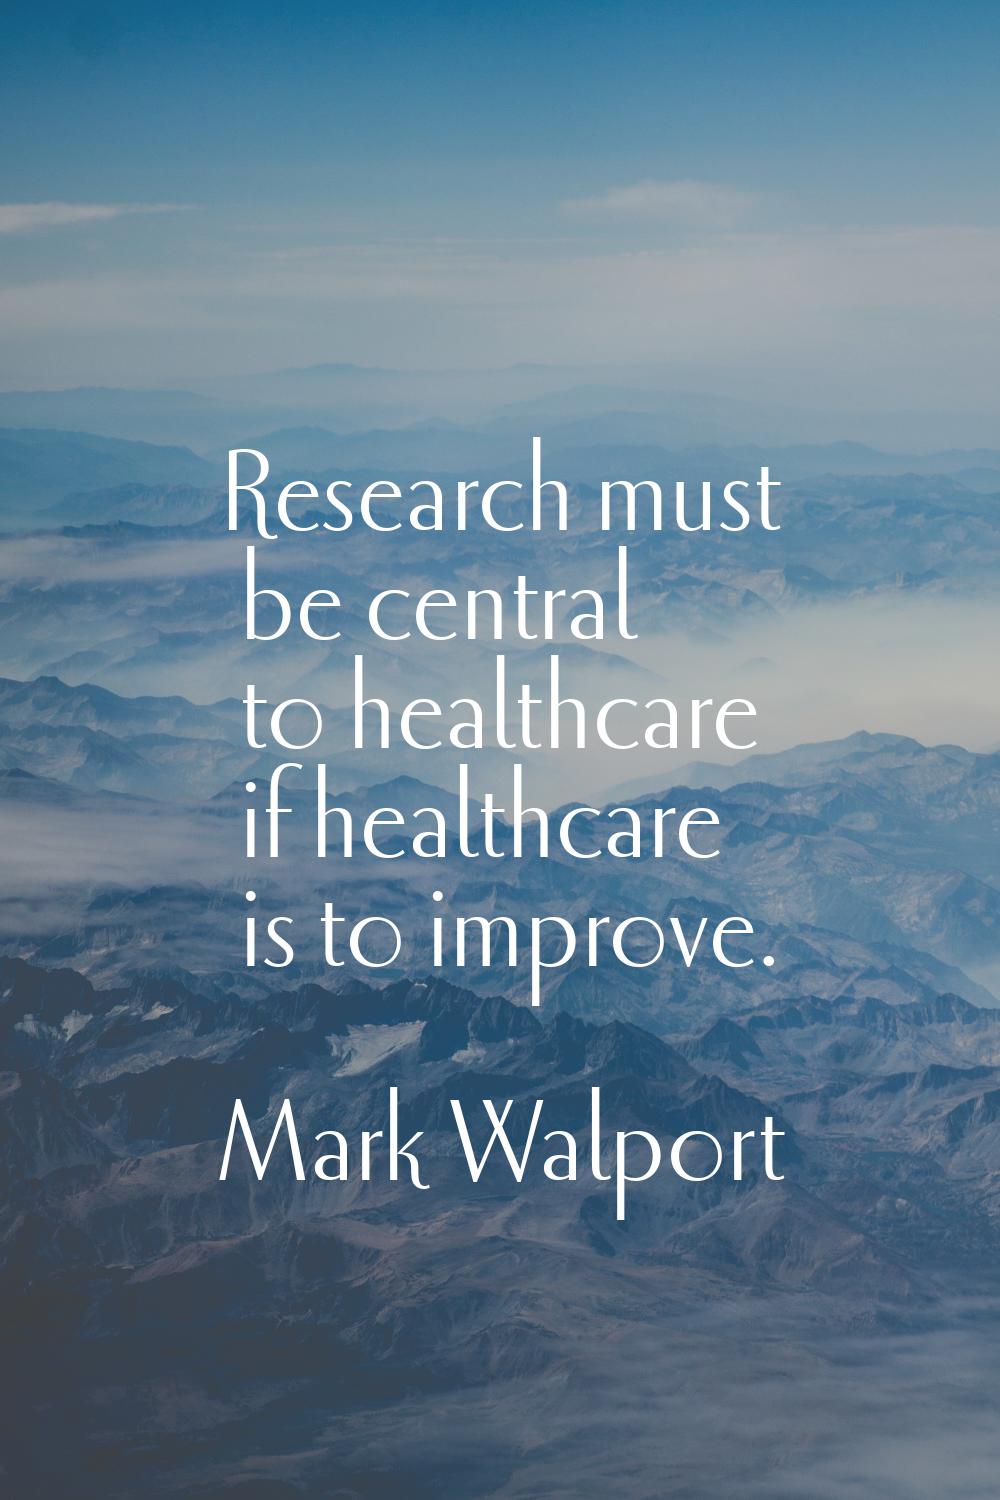 Research must be central to healthcare if healthcare is to improve.